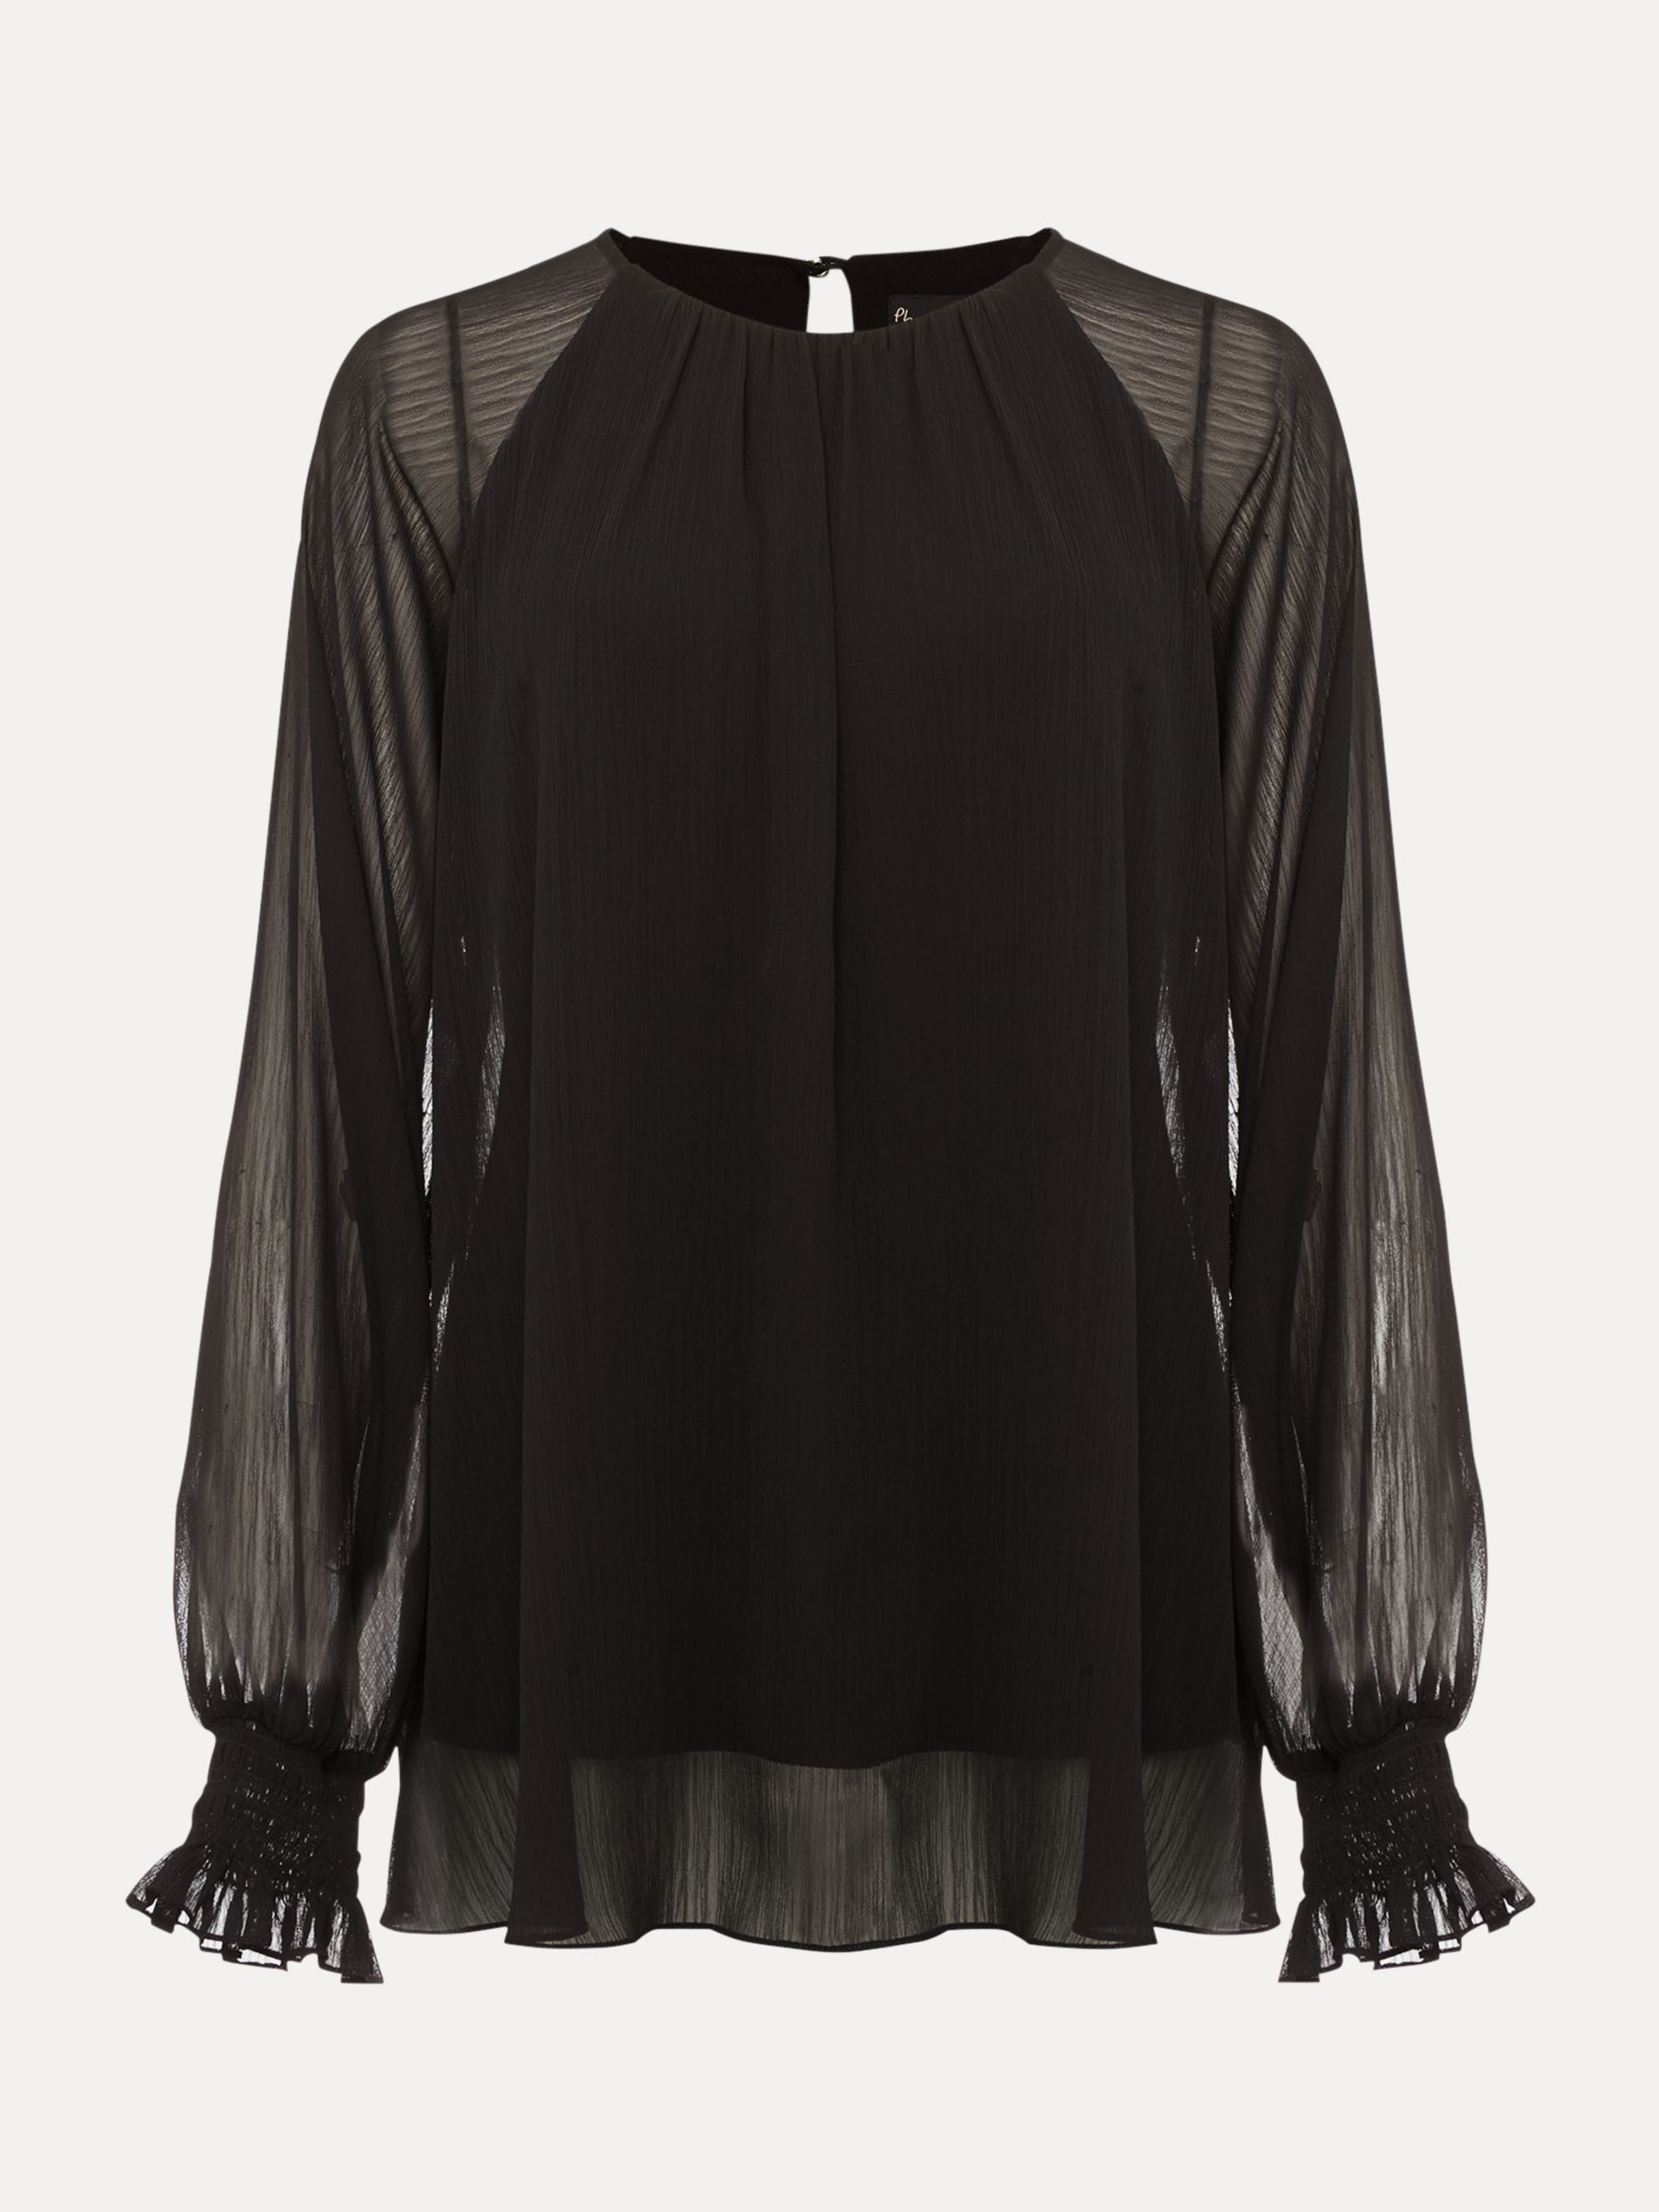 Buy Phase Eight Aria Chiffon Double Layer Top, Black Online at johnlewis.com